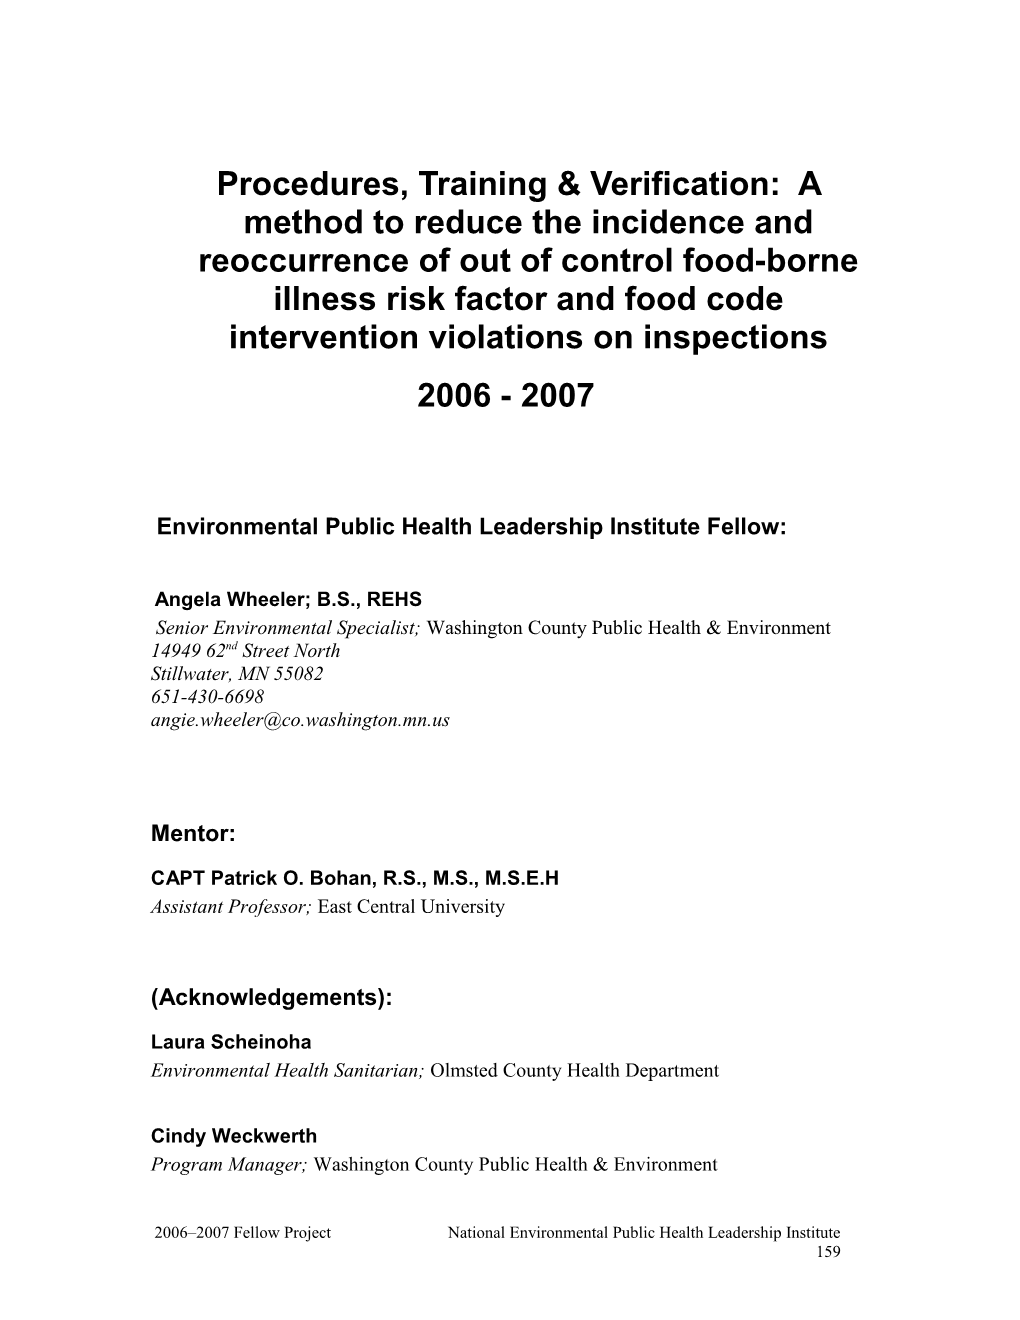 Procedures, Training & Verification: a Method to Reduce the Incidence and Reoccurrence